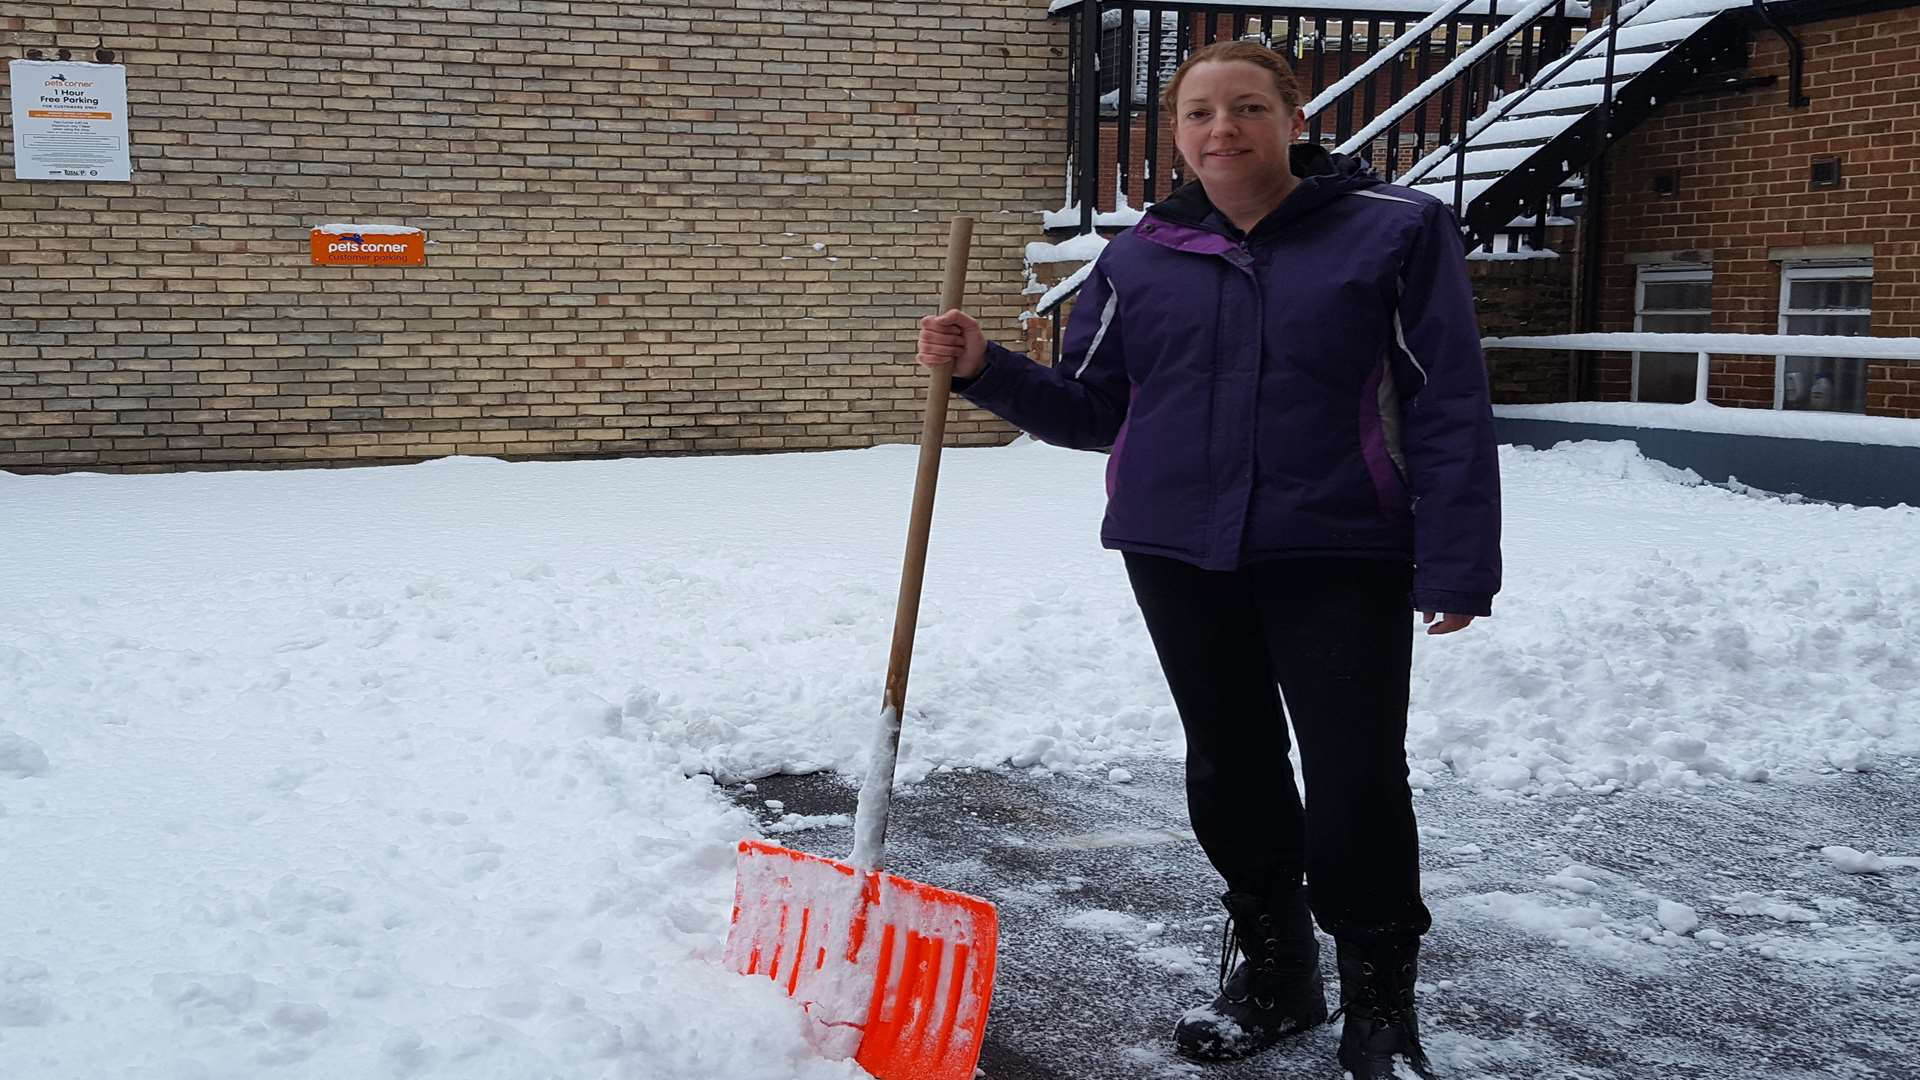 Louise Emmerick, assistant manager at Pets Corner in Week Street, clearing the snow